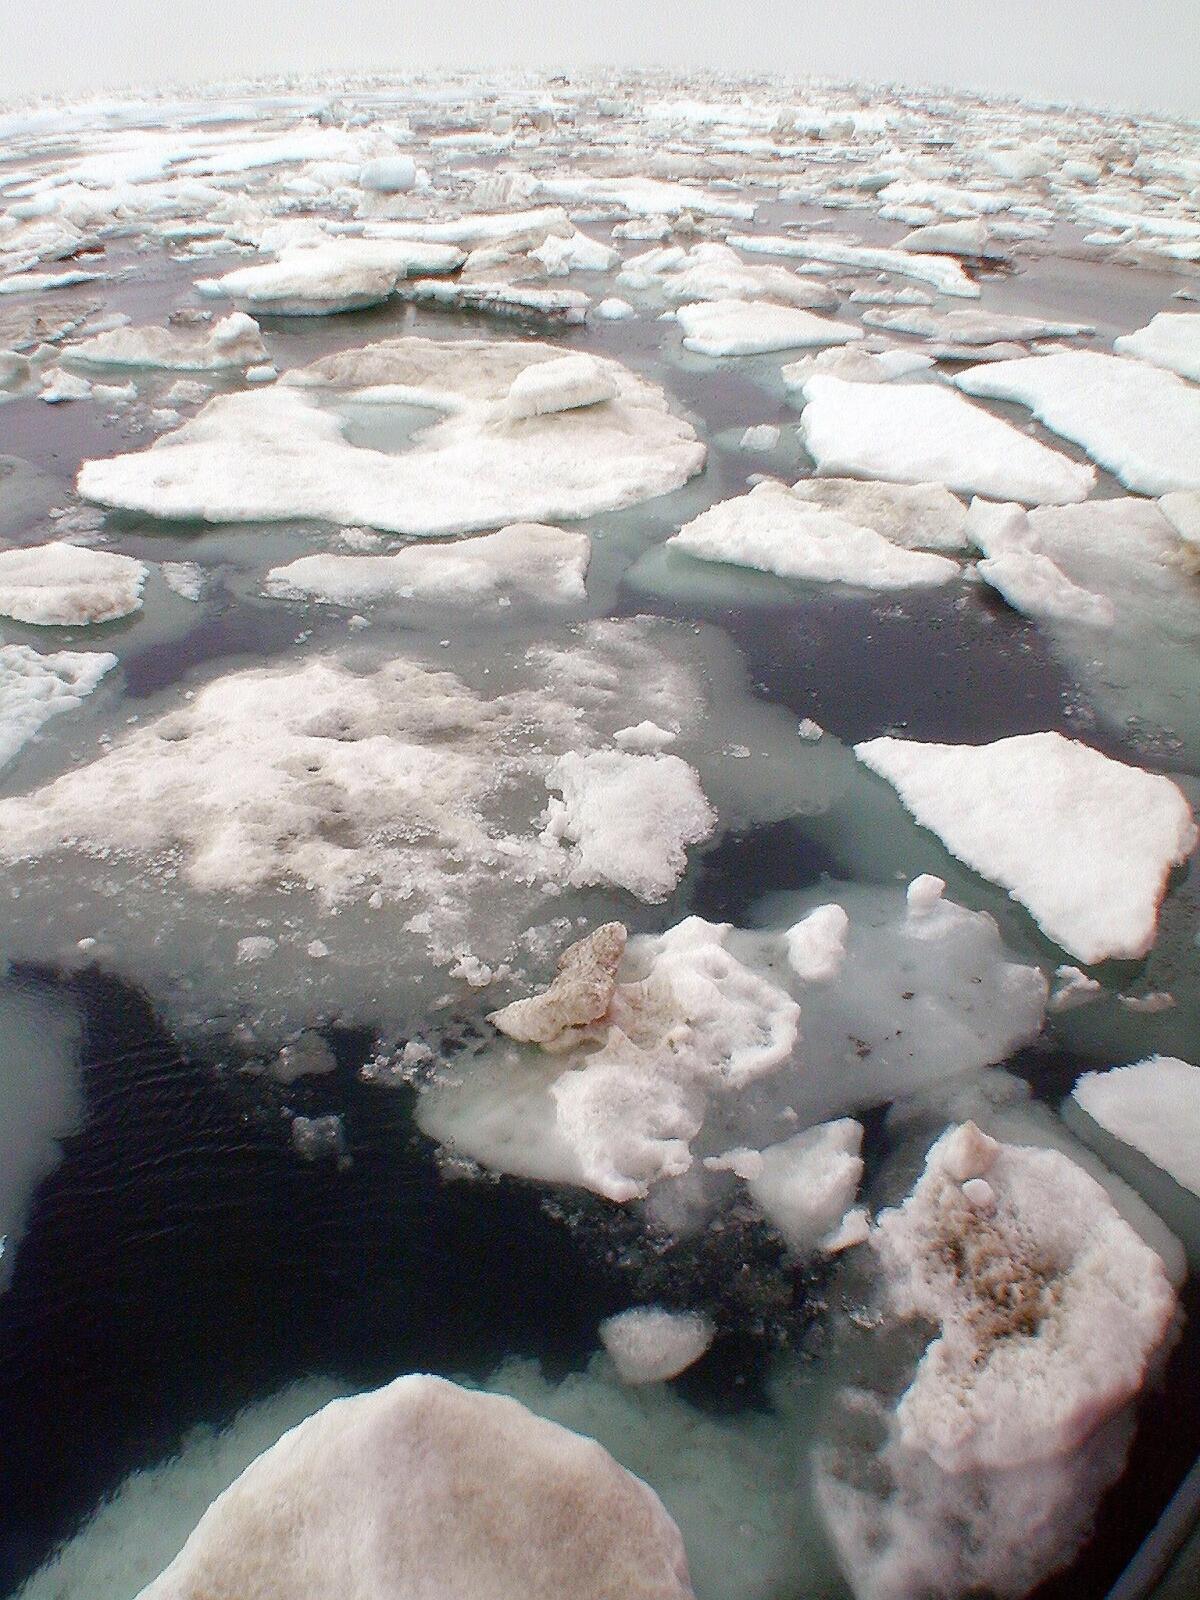 The loss of Arctic sea ice is linked to extreme weather patterns in the U.S. and other areas of the Northern Hemisphere, according to researchers.